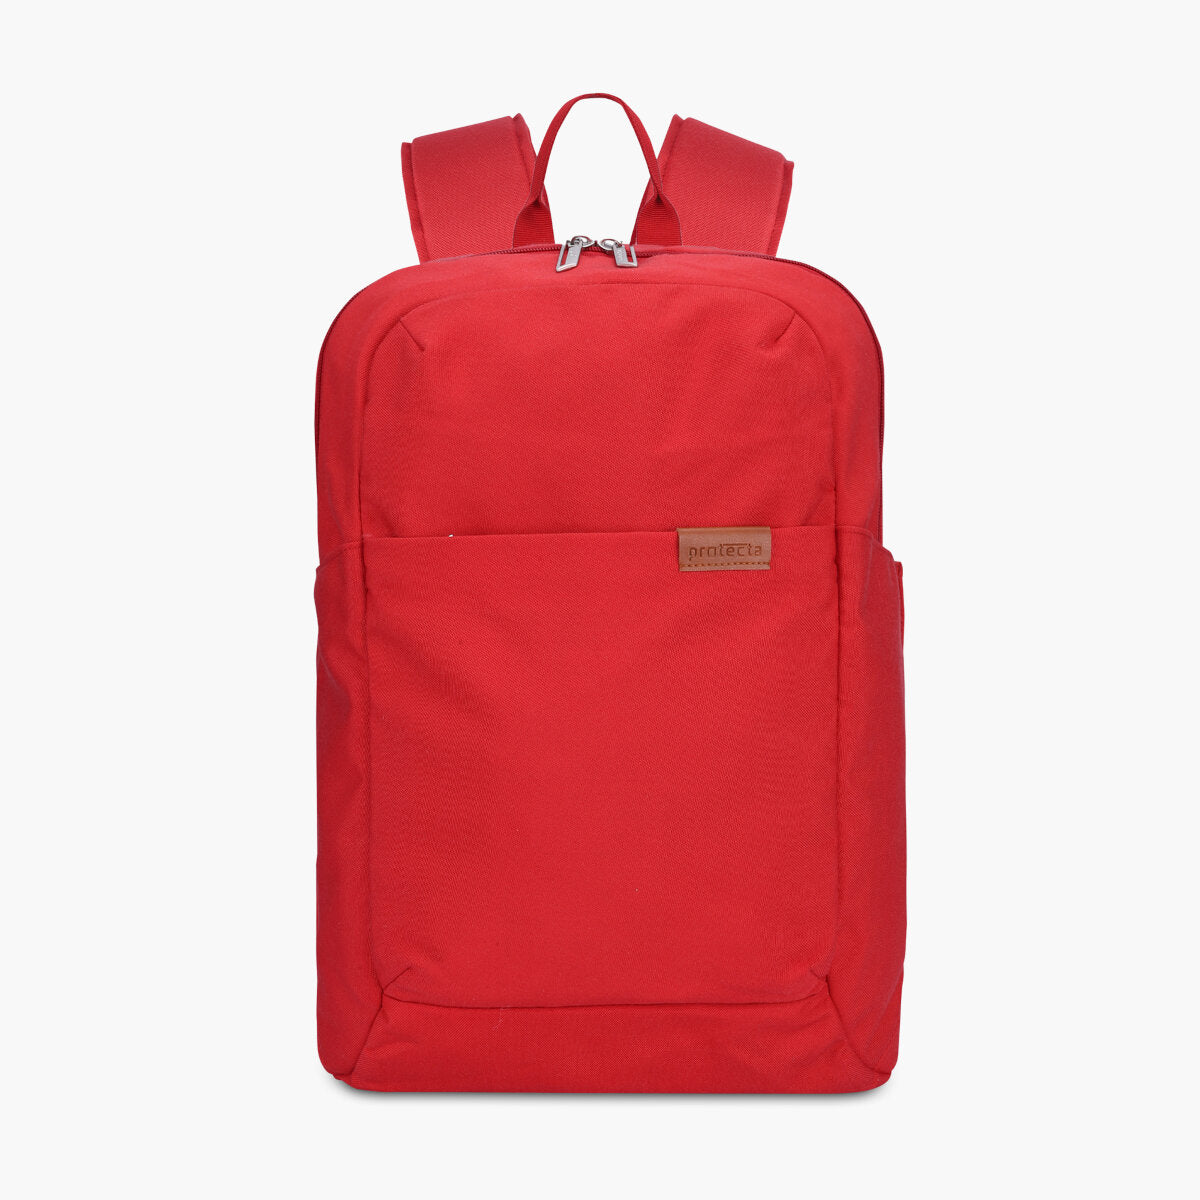 Red | Protecta Strong Buzz Laptop Backpack - Main